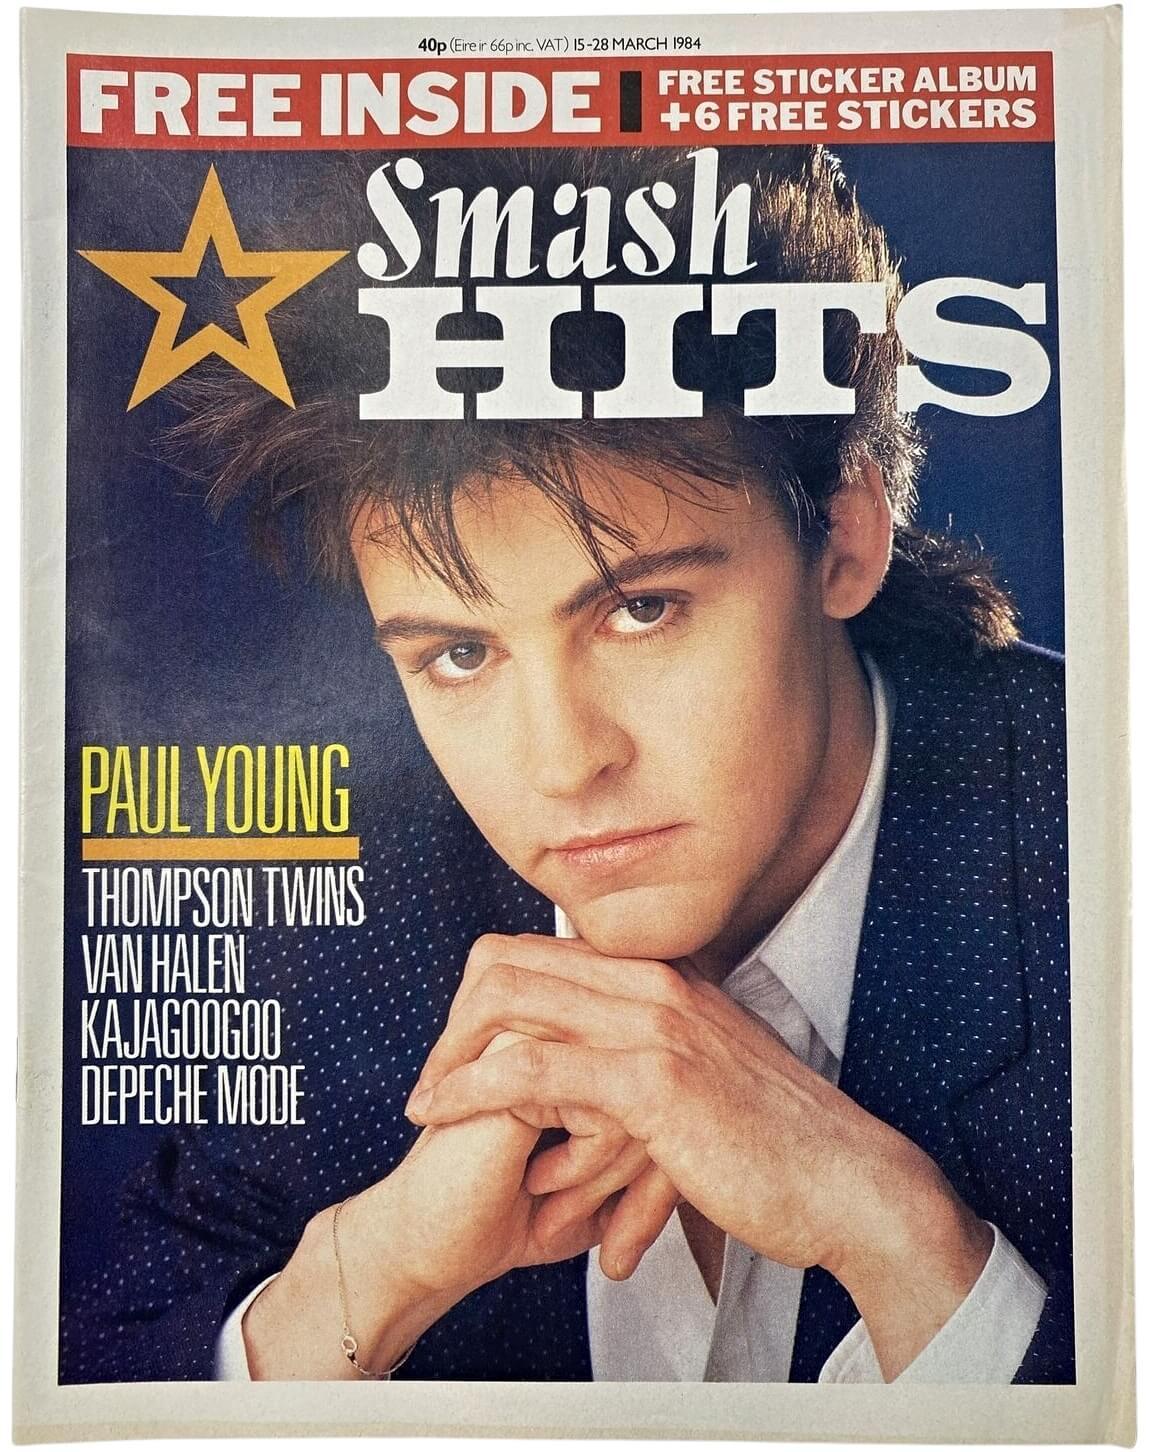 <p>Paul Young on the front cover of Smash Hits magazine (March 1984)</p>